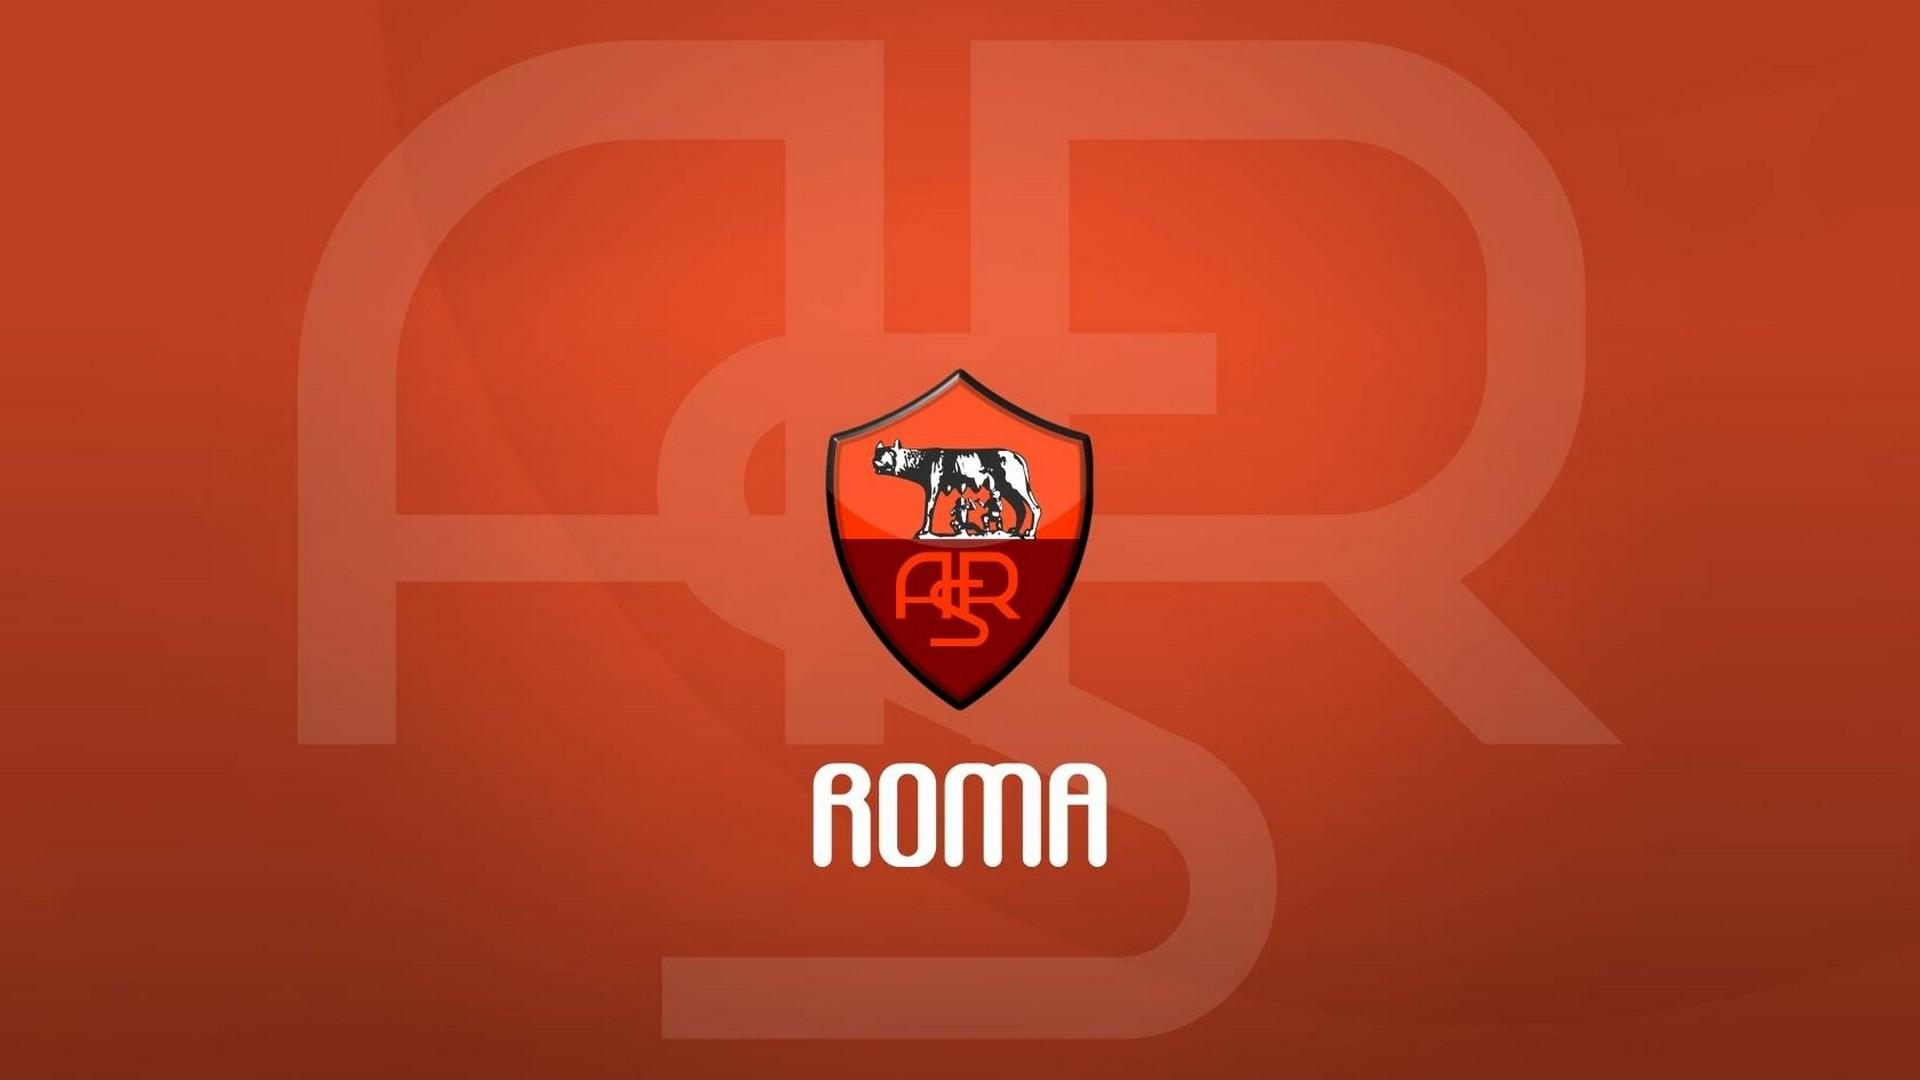 Free download HD Background AS Roma 2019 Football Wallpaper